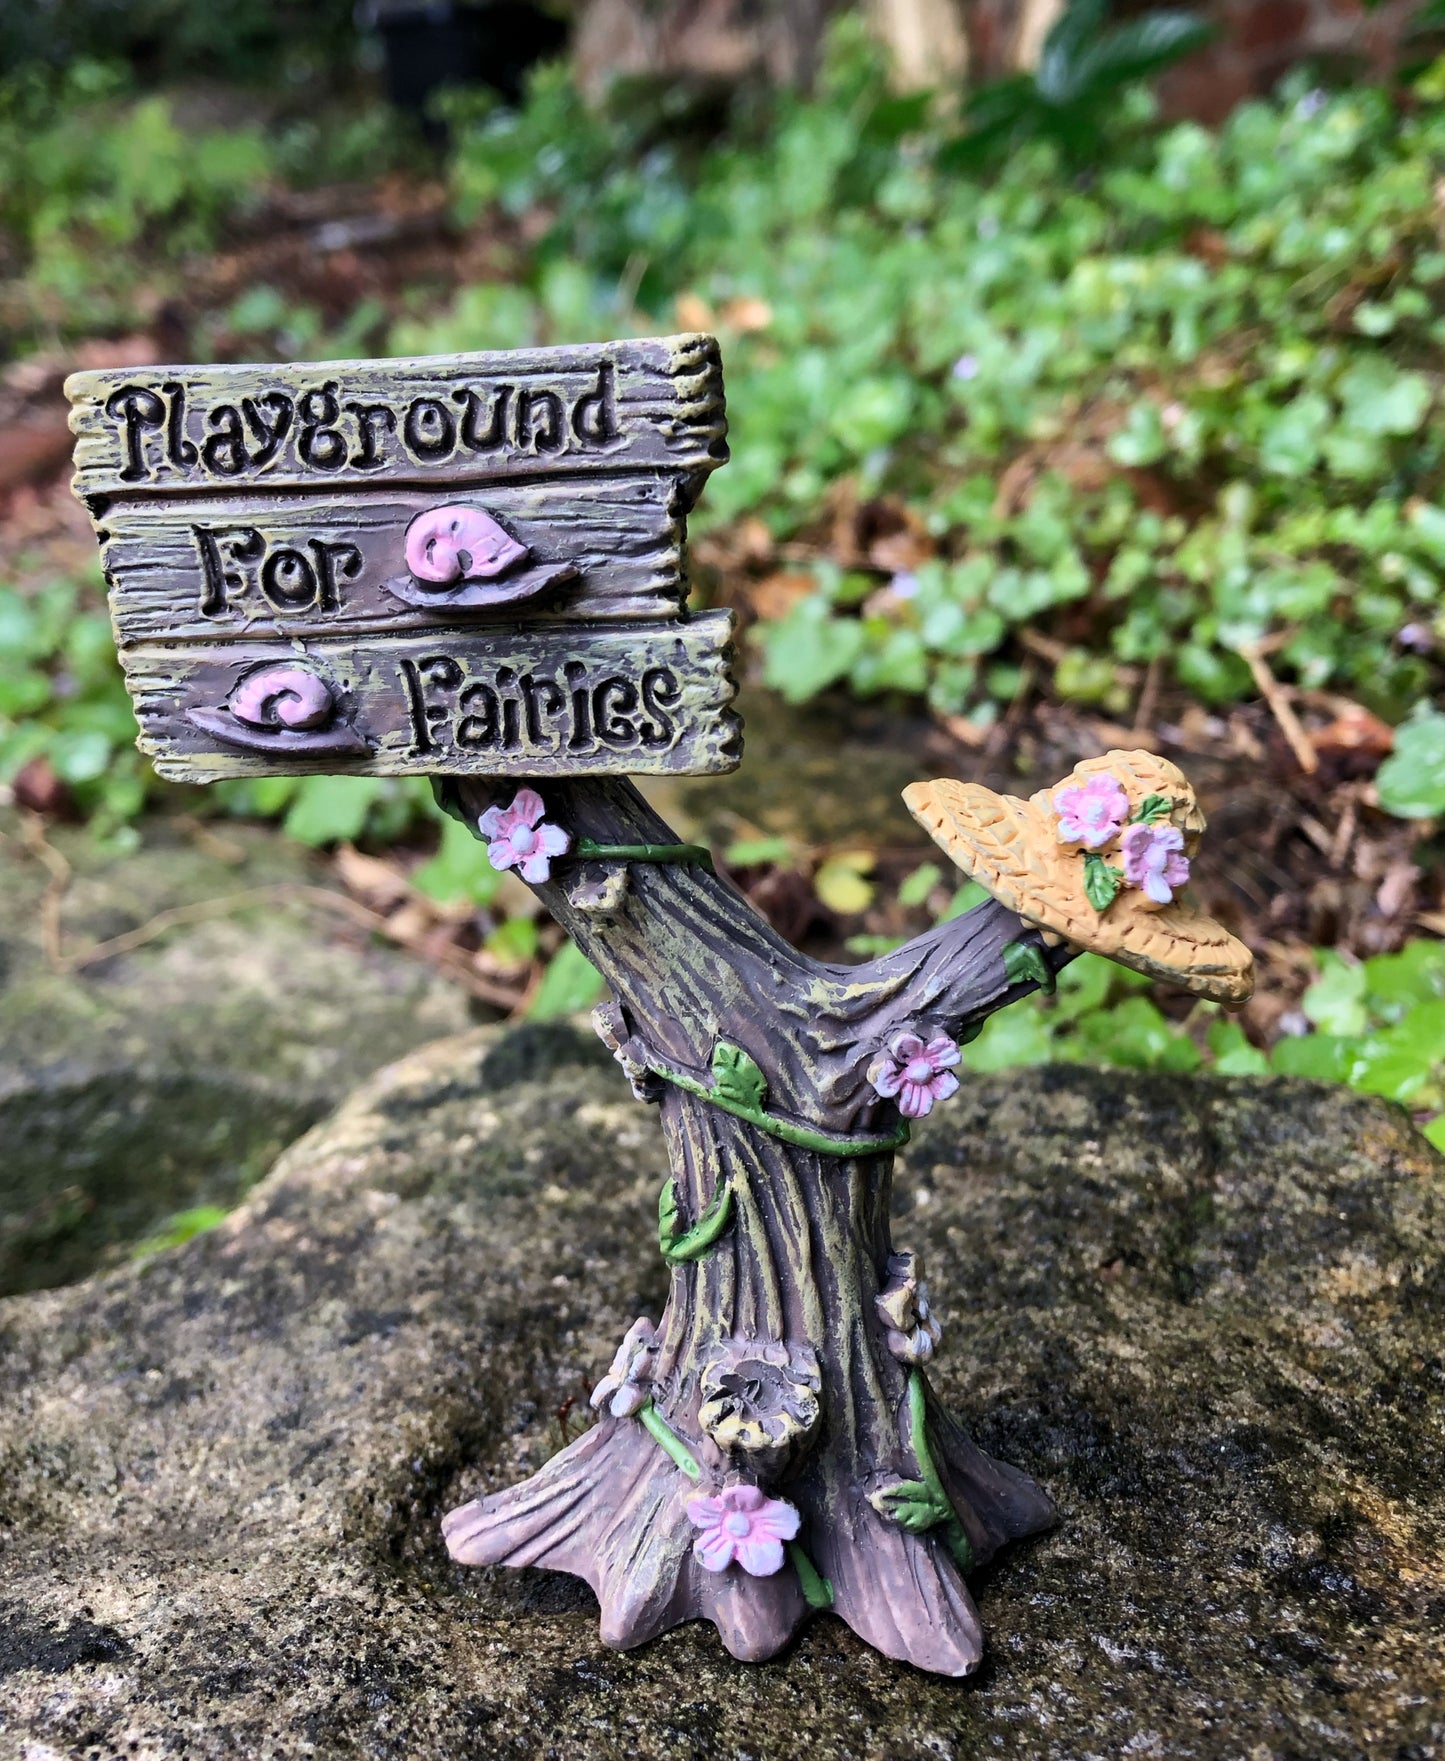 Playground for Fairies Sign